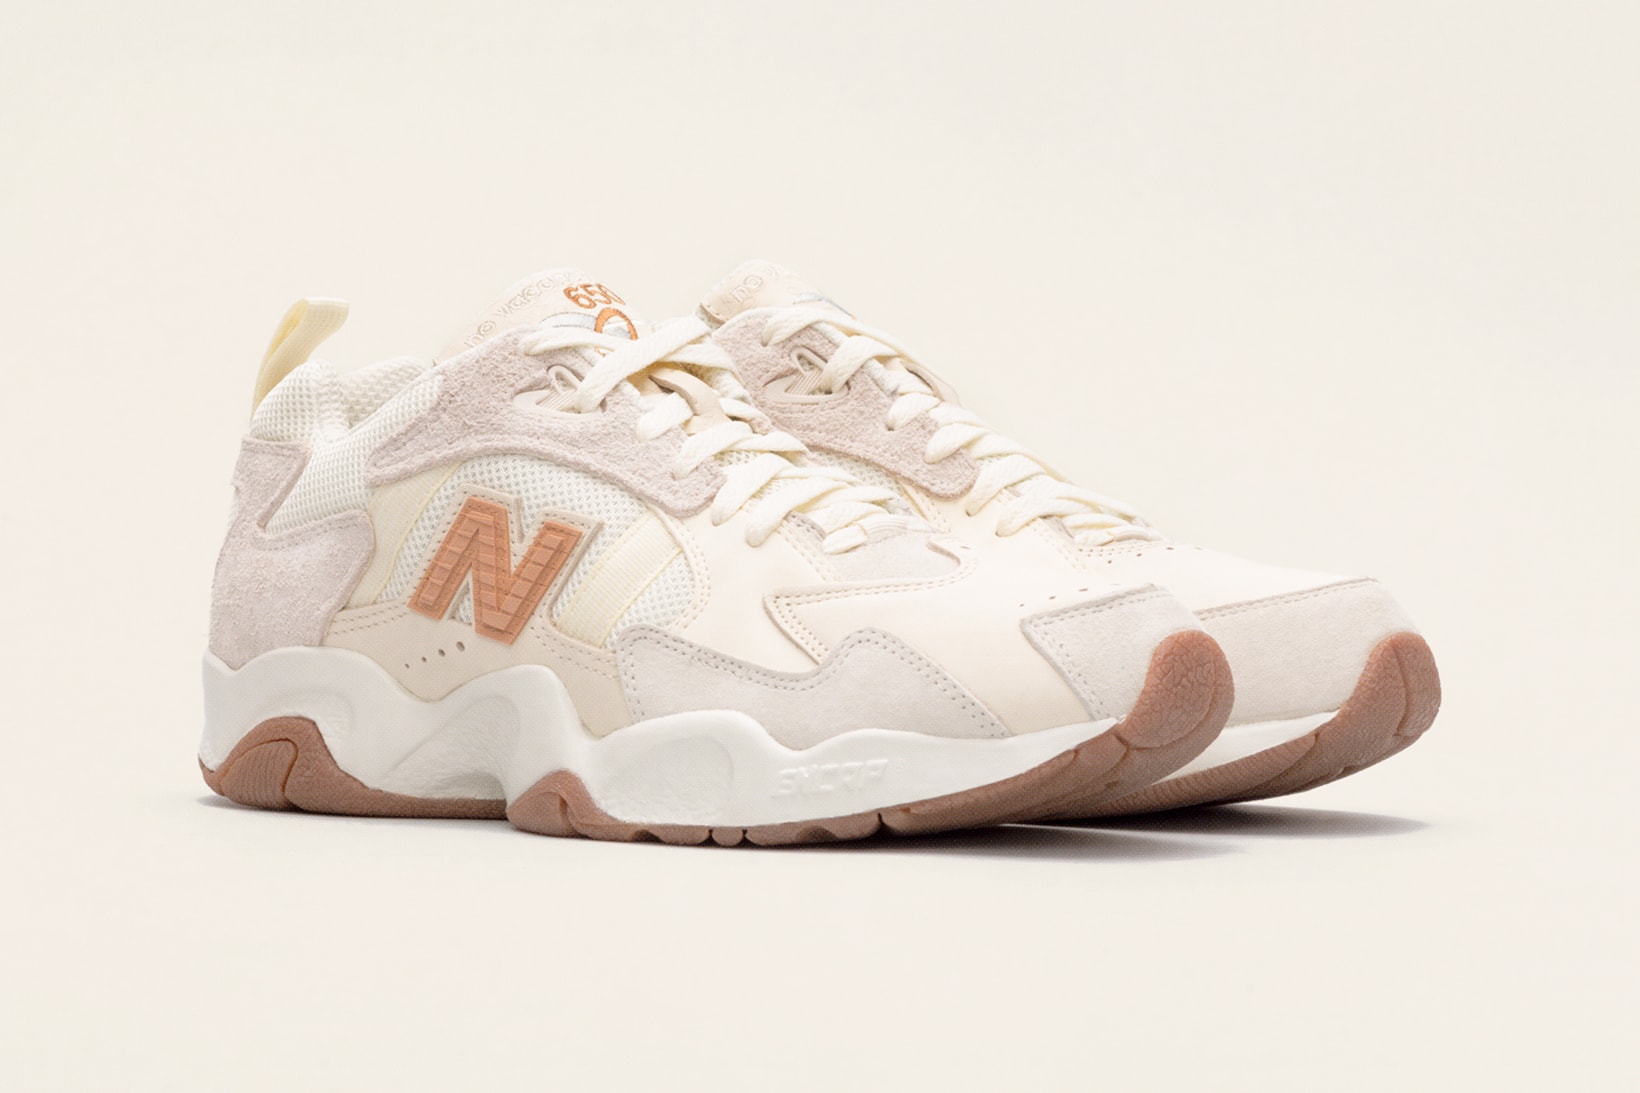 new balance 650 no vacancy inn collaboration stockx ipo auction beige white brown shoes sneakerhead footwear